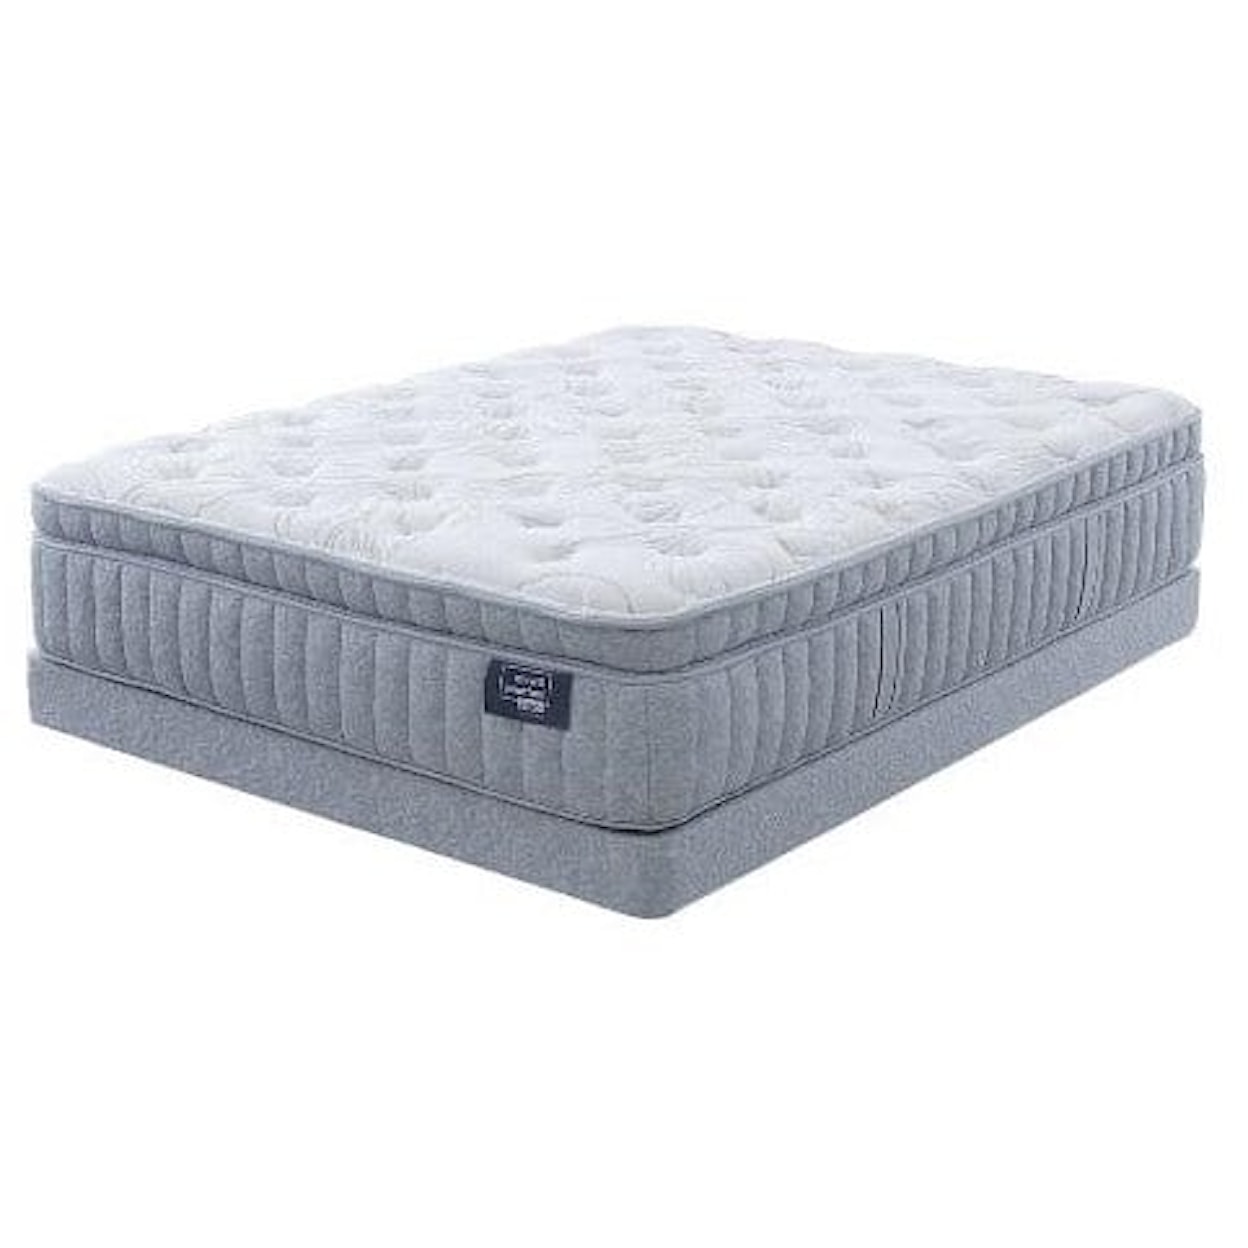 Drew & Jonathan Home by Restonic Mattress Bellflower Ultra Plush Queen Ultra Plush With Low Profile